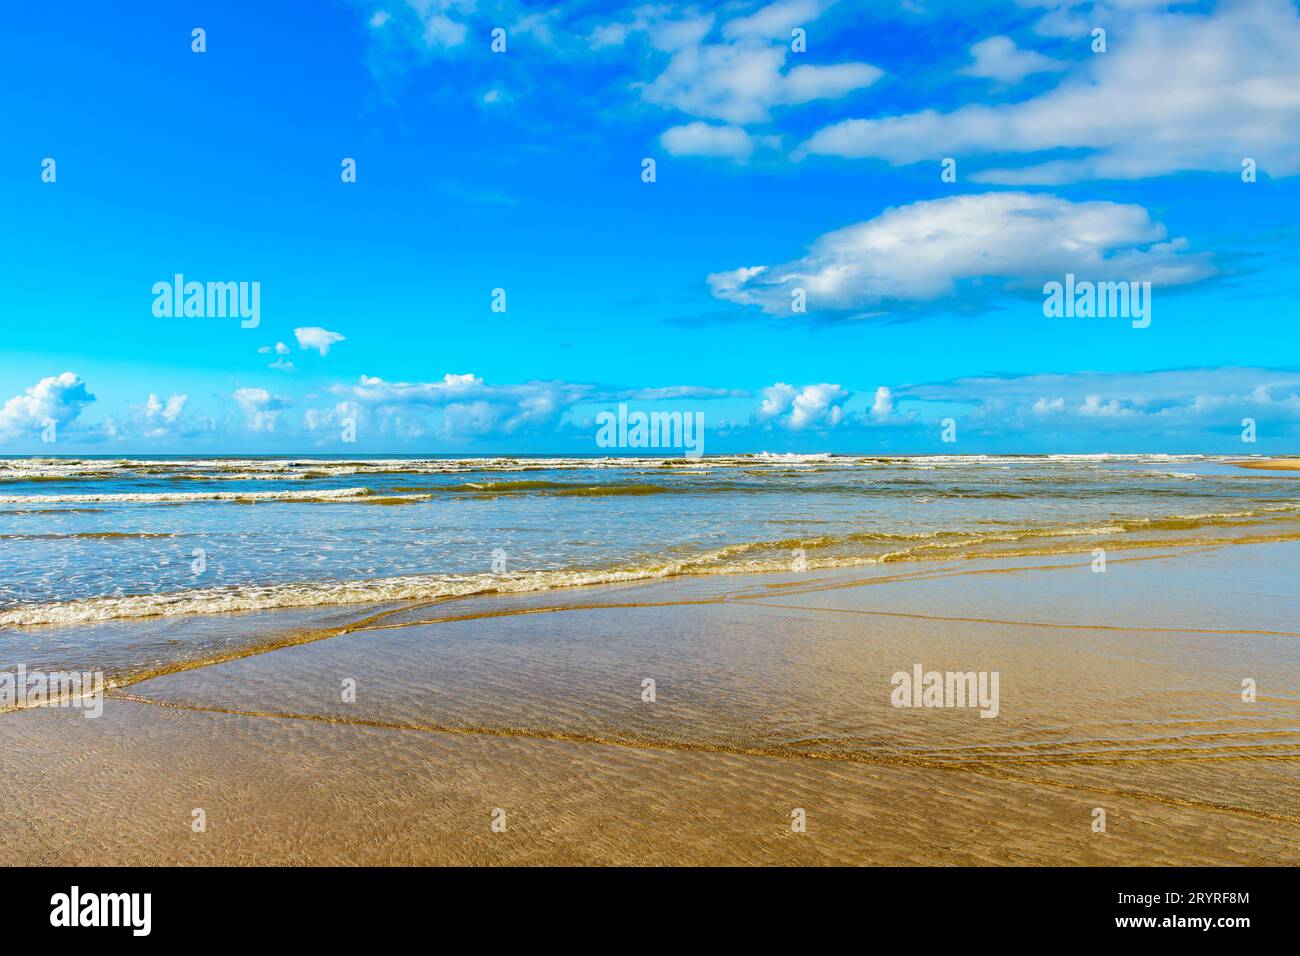 Quiet and deserted beach with small waves and clear waters Stock Photo